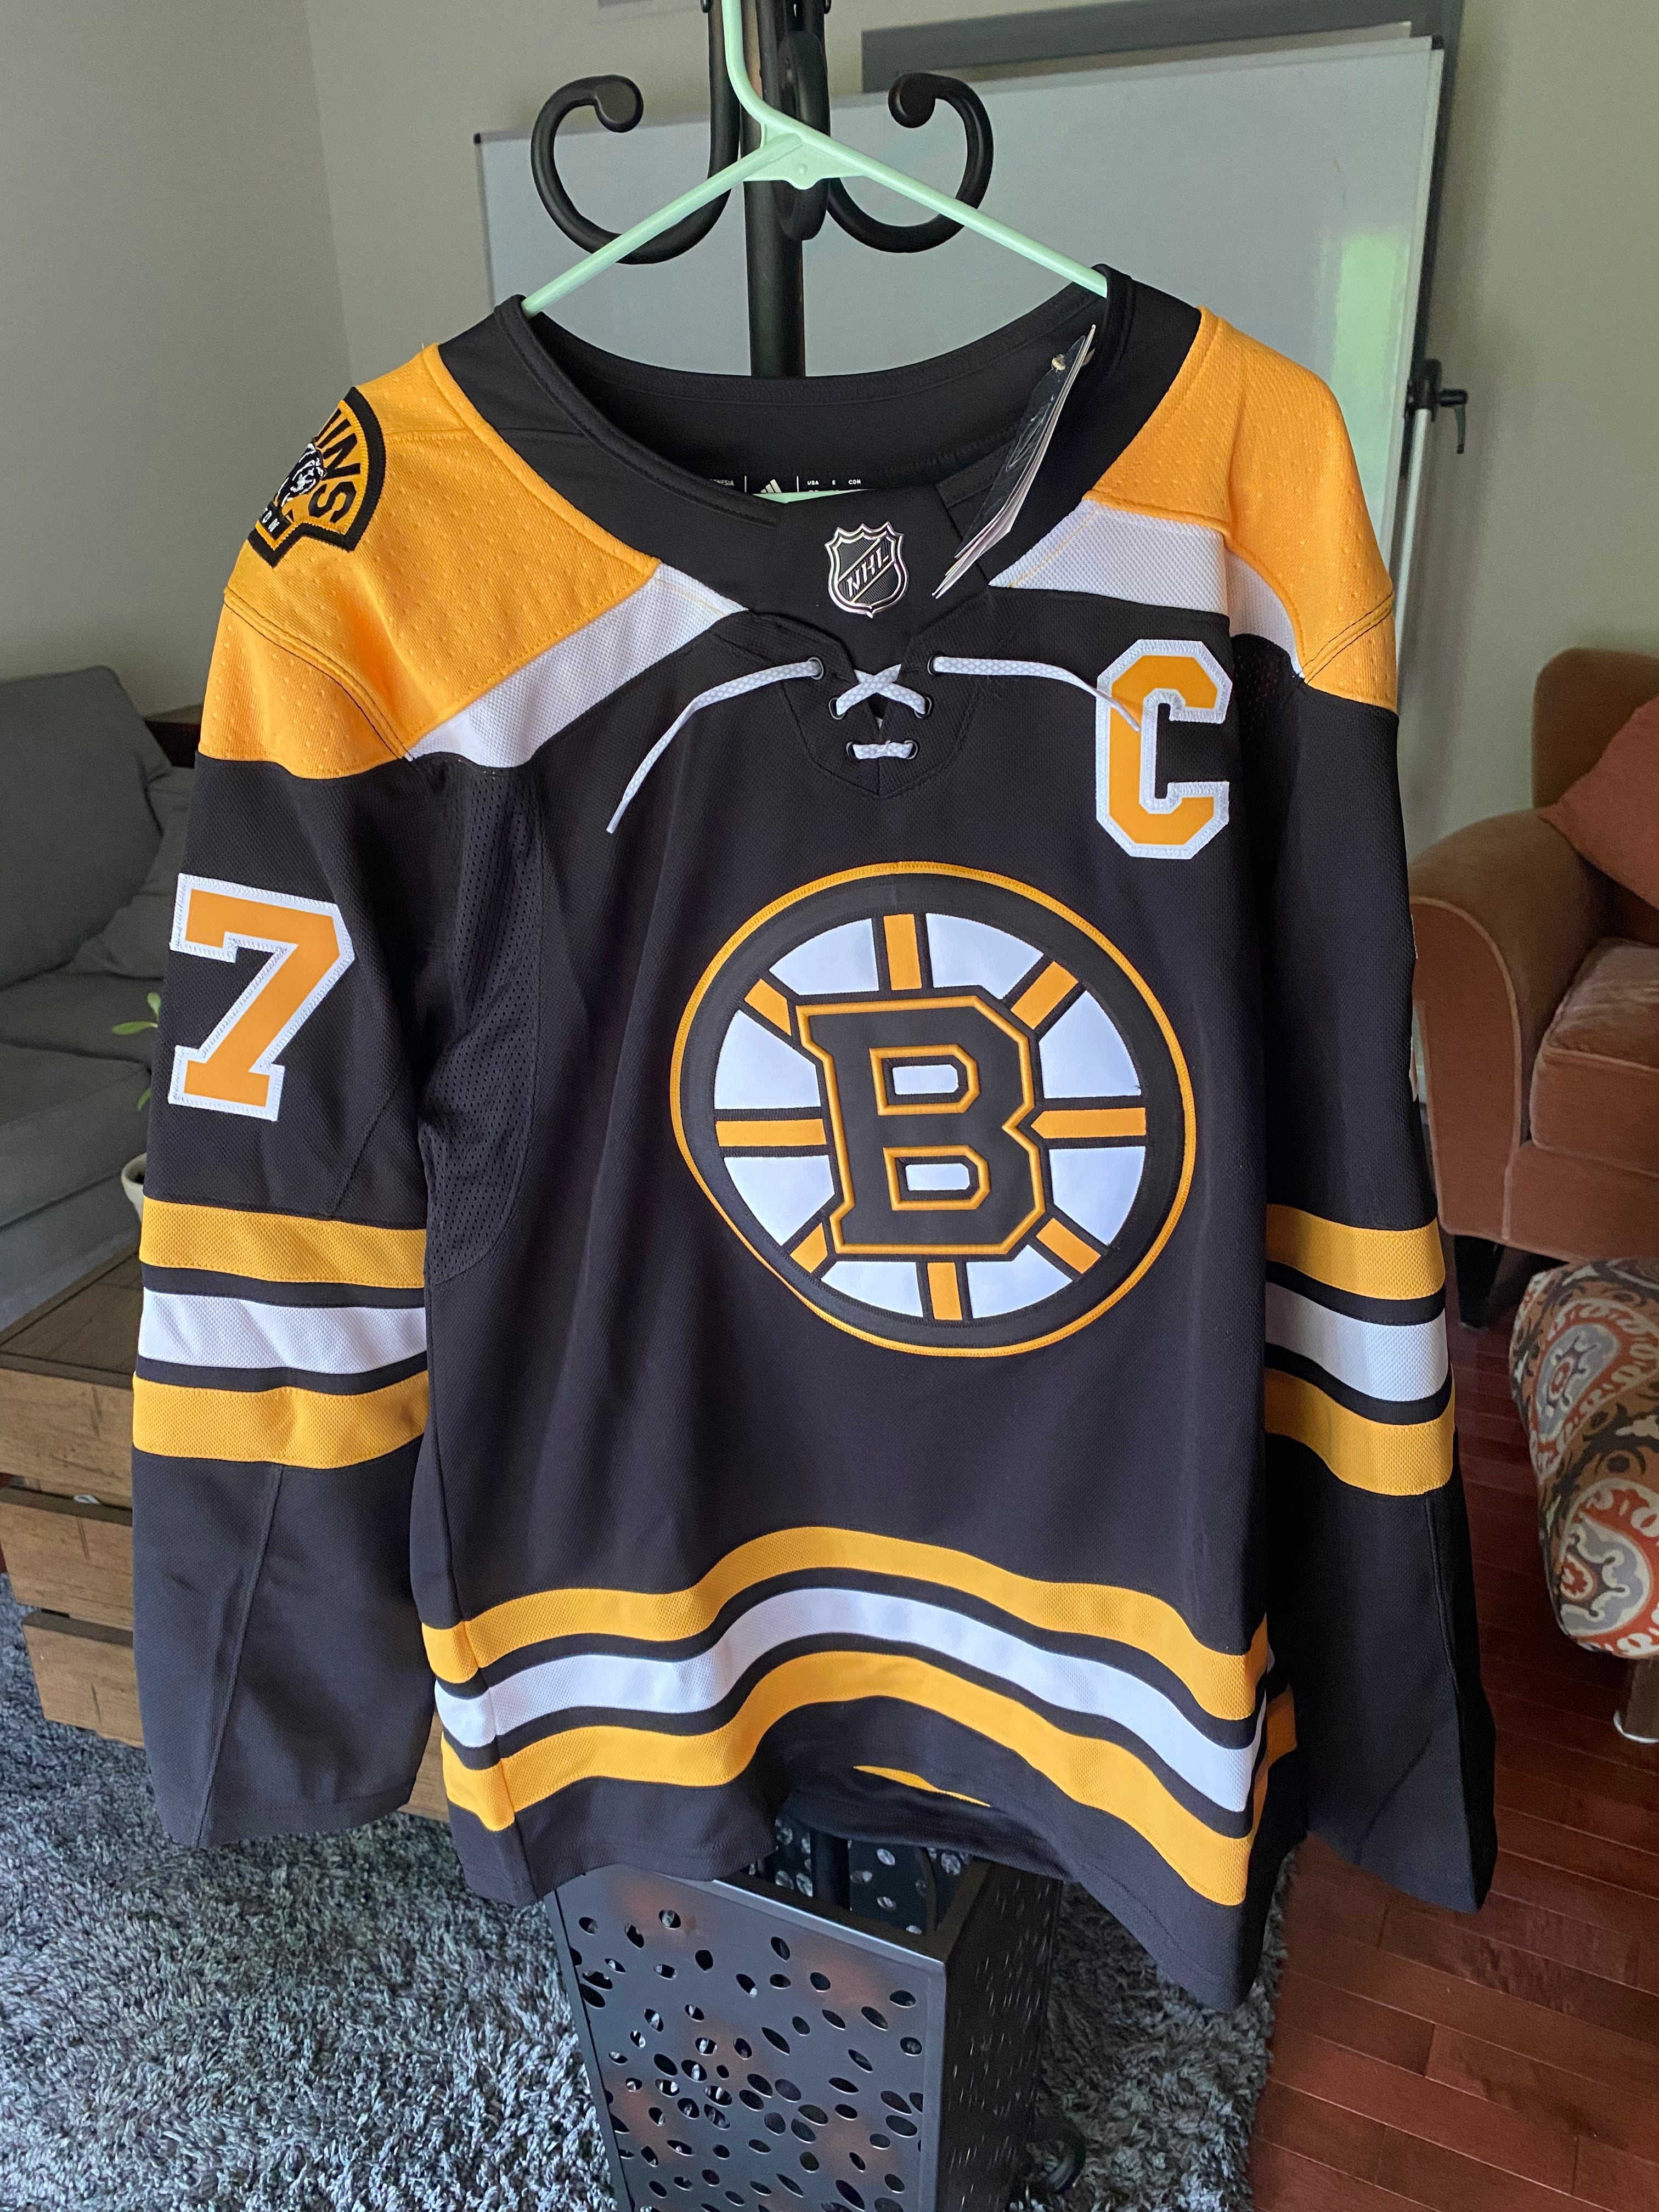 Reebok EDGE Patrice Bergeron Boston Bruins Authentic With Stanley Cup  Champions Jersey - White